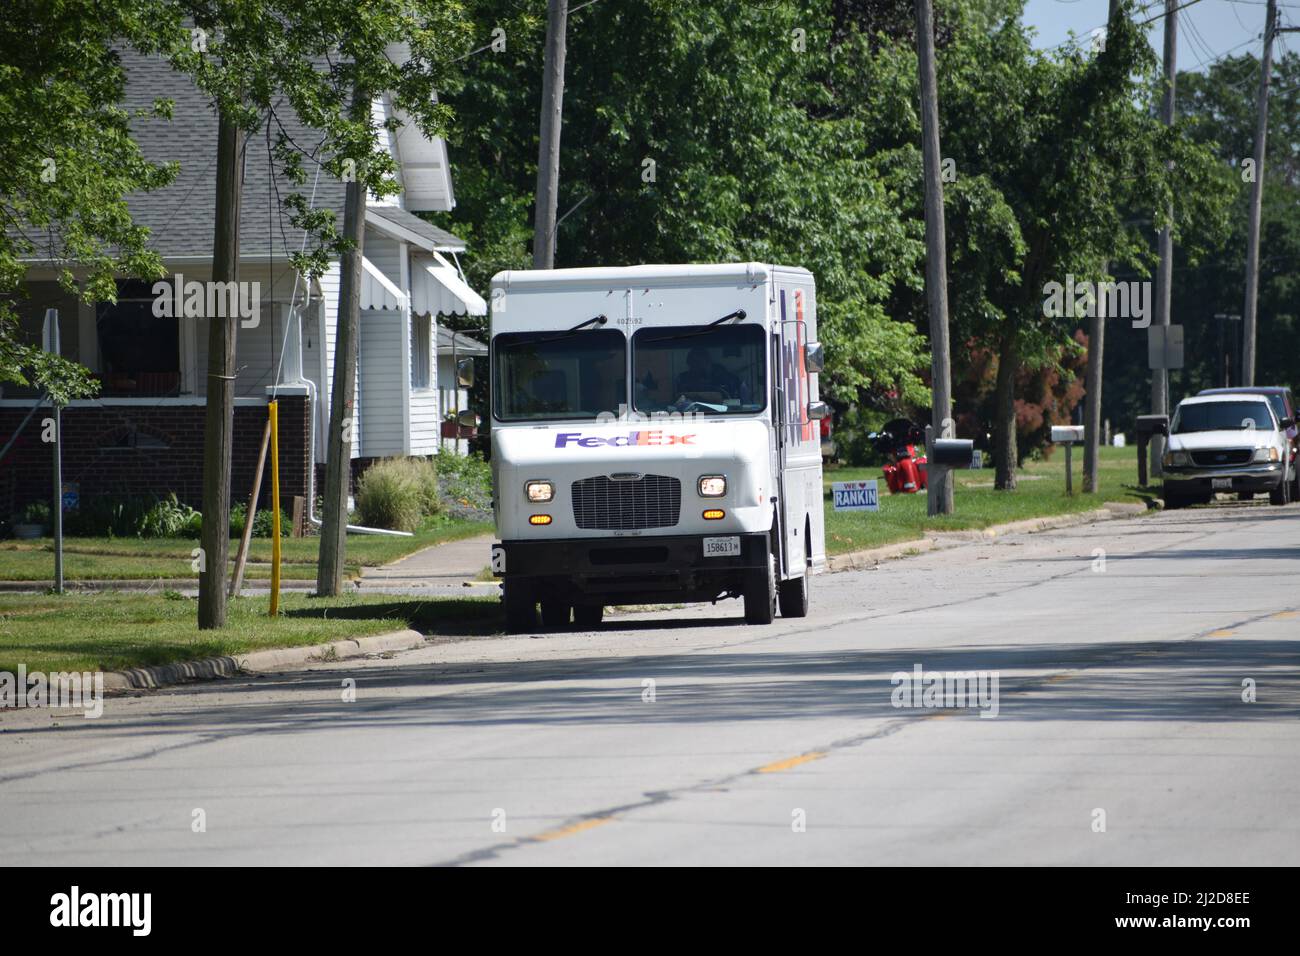 A FedEx delivery truck parked on Illinois Route 49 in the small town of Rankin, Illinois Stock Photo